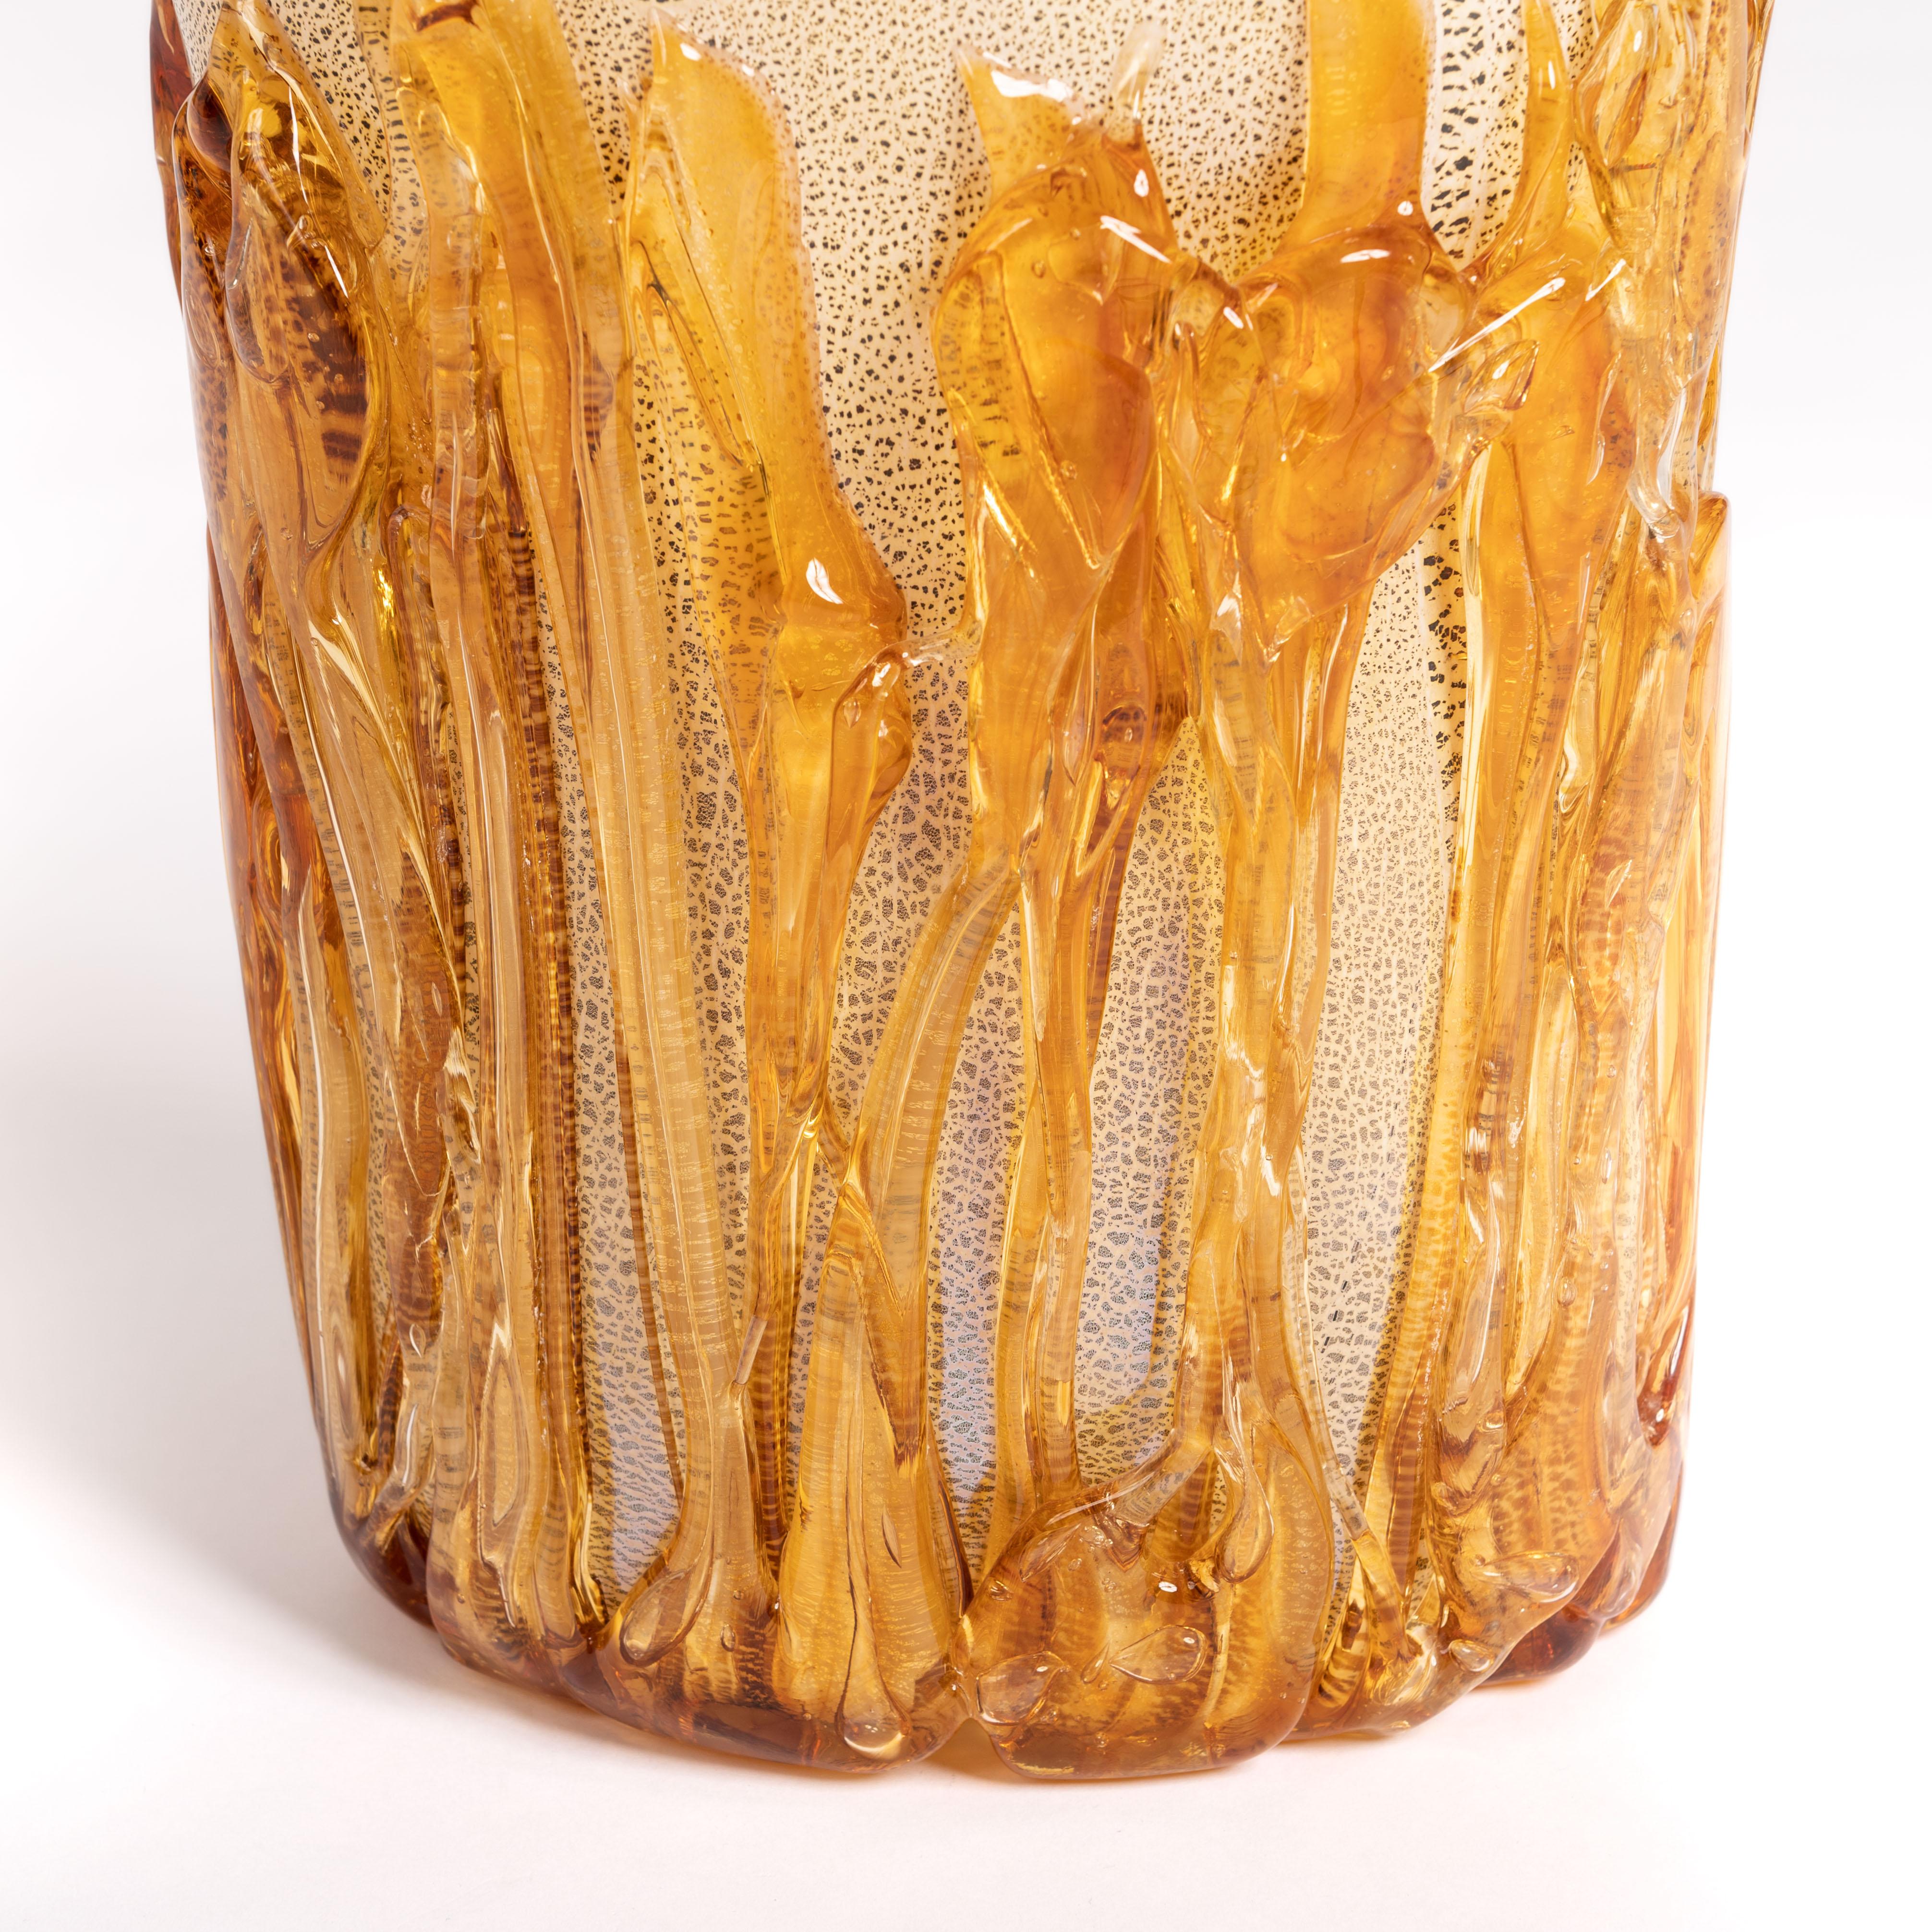 Contemporary Modern Murano Glass Vase in Gold-Amber Color signed by Hand, Italy 2015 For Sale